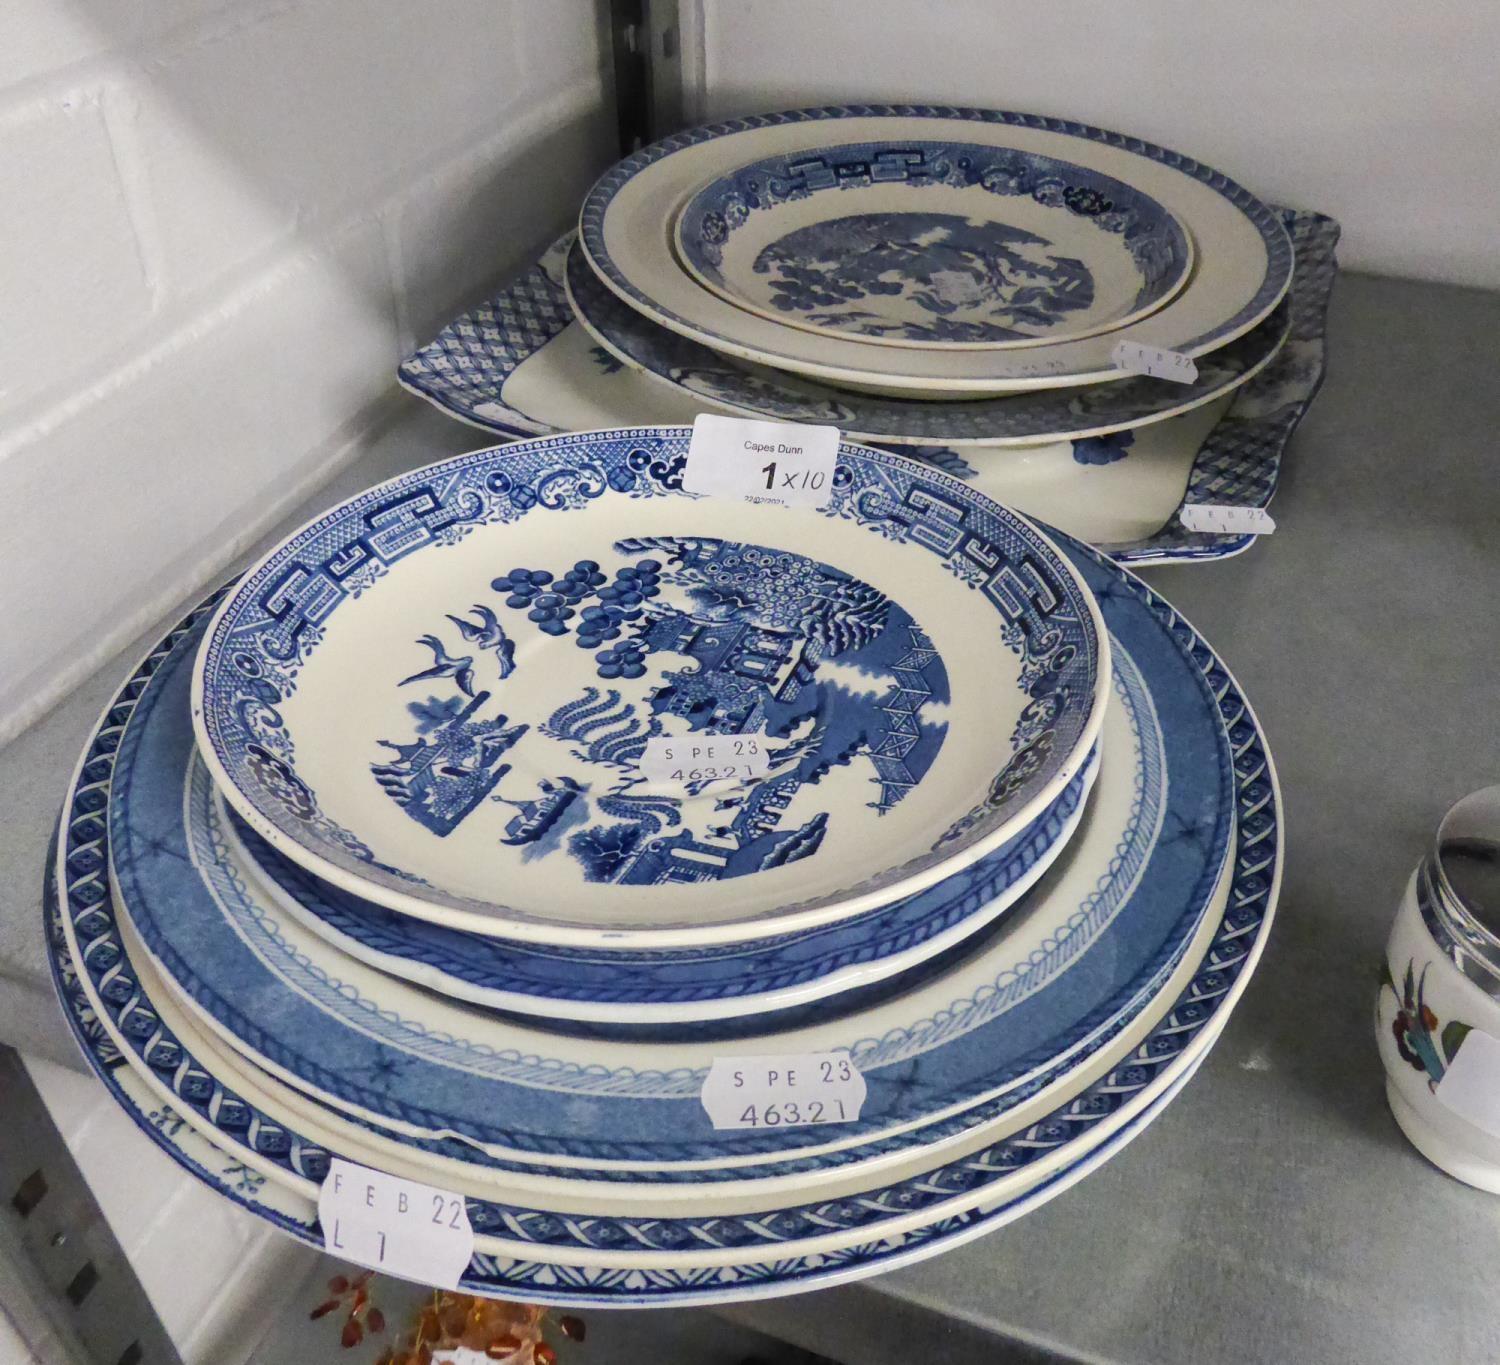 WOOD AND SONS 'YUAN' PATTERN POTTERY SQUARE PLATTER AND MATCHING SOUP PLATE, AND EIGHT OTHER